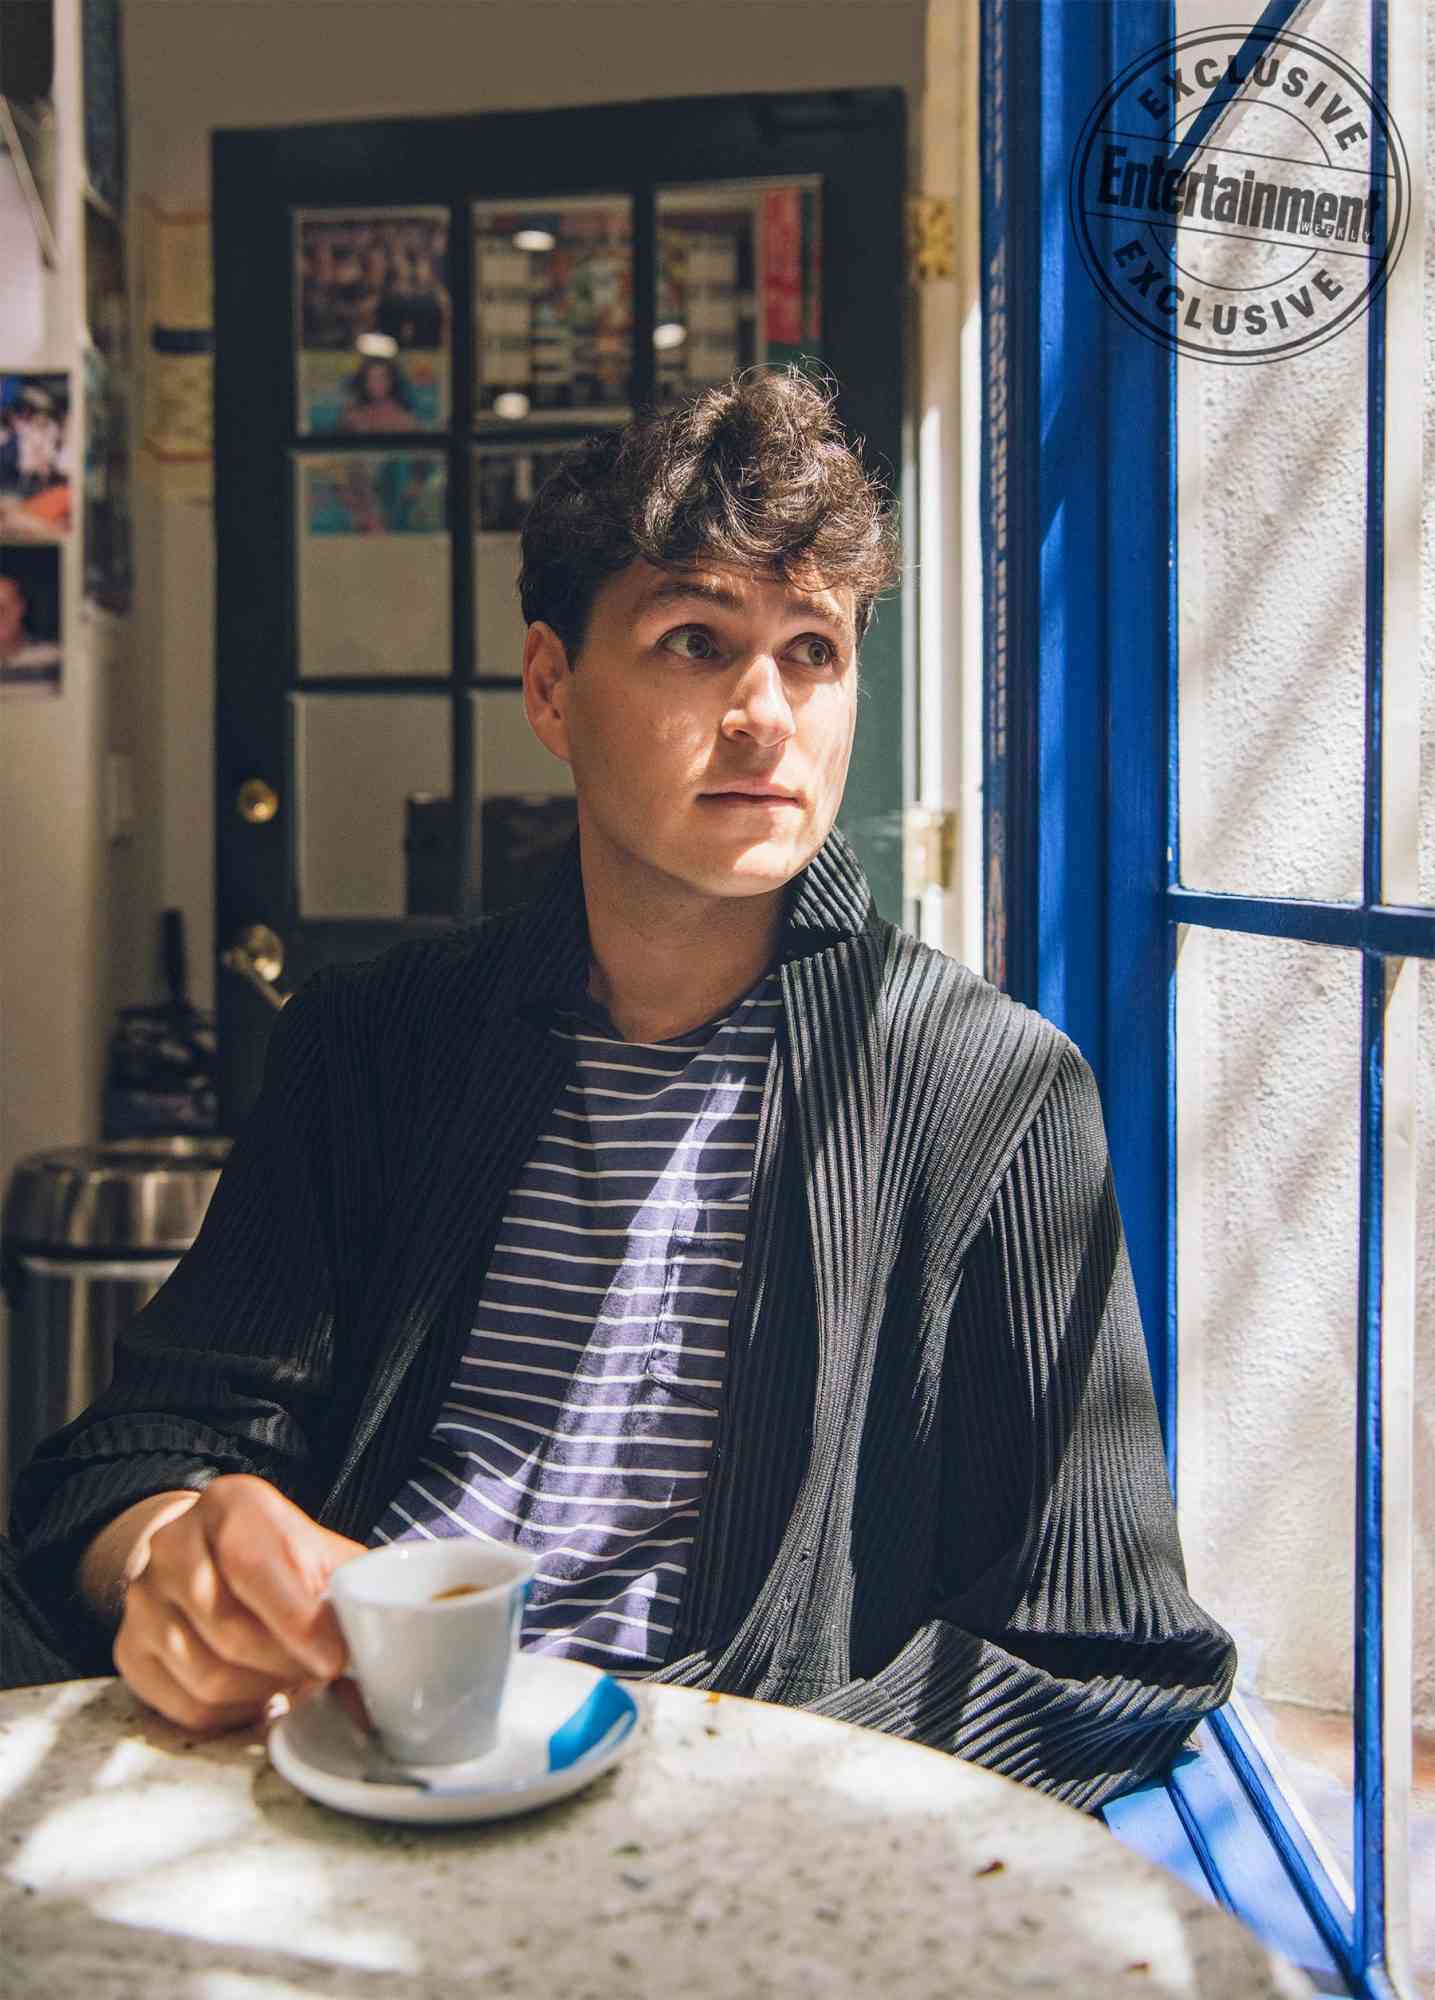 Ezra Koenig photographed exclusively for Entertainment Weekly by Dustin Aksland on April 8th, 2019 in Beverly Hills, CA at EURO CAFFE (must be in story/credit)